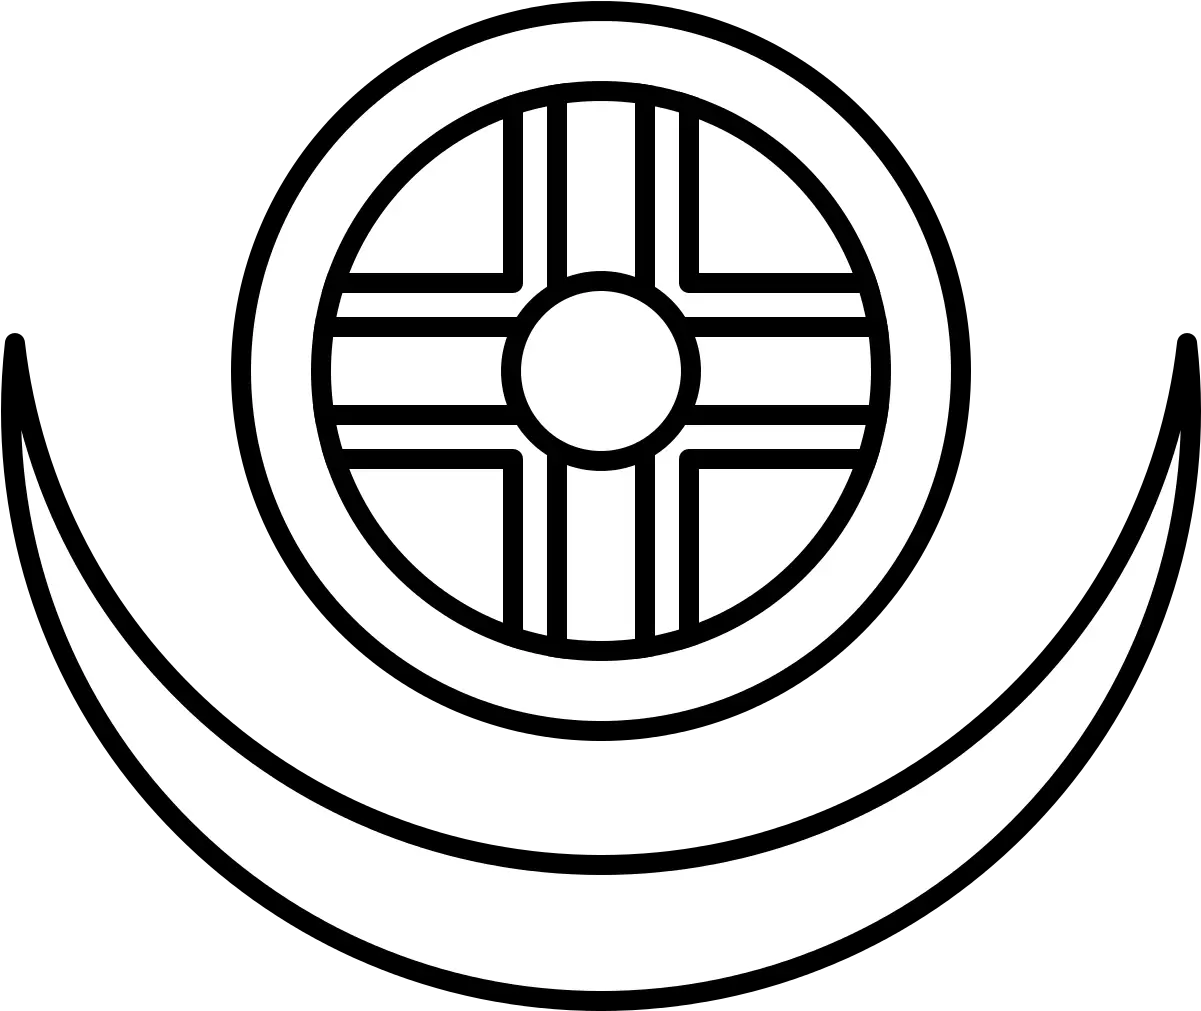 Filesun Wheel In The Crescent Of Moonsvg Wikimedia Commons Sun And Crescent Moon Symbol Png Cresent Moon Png